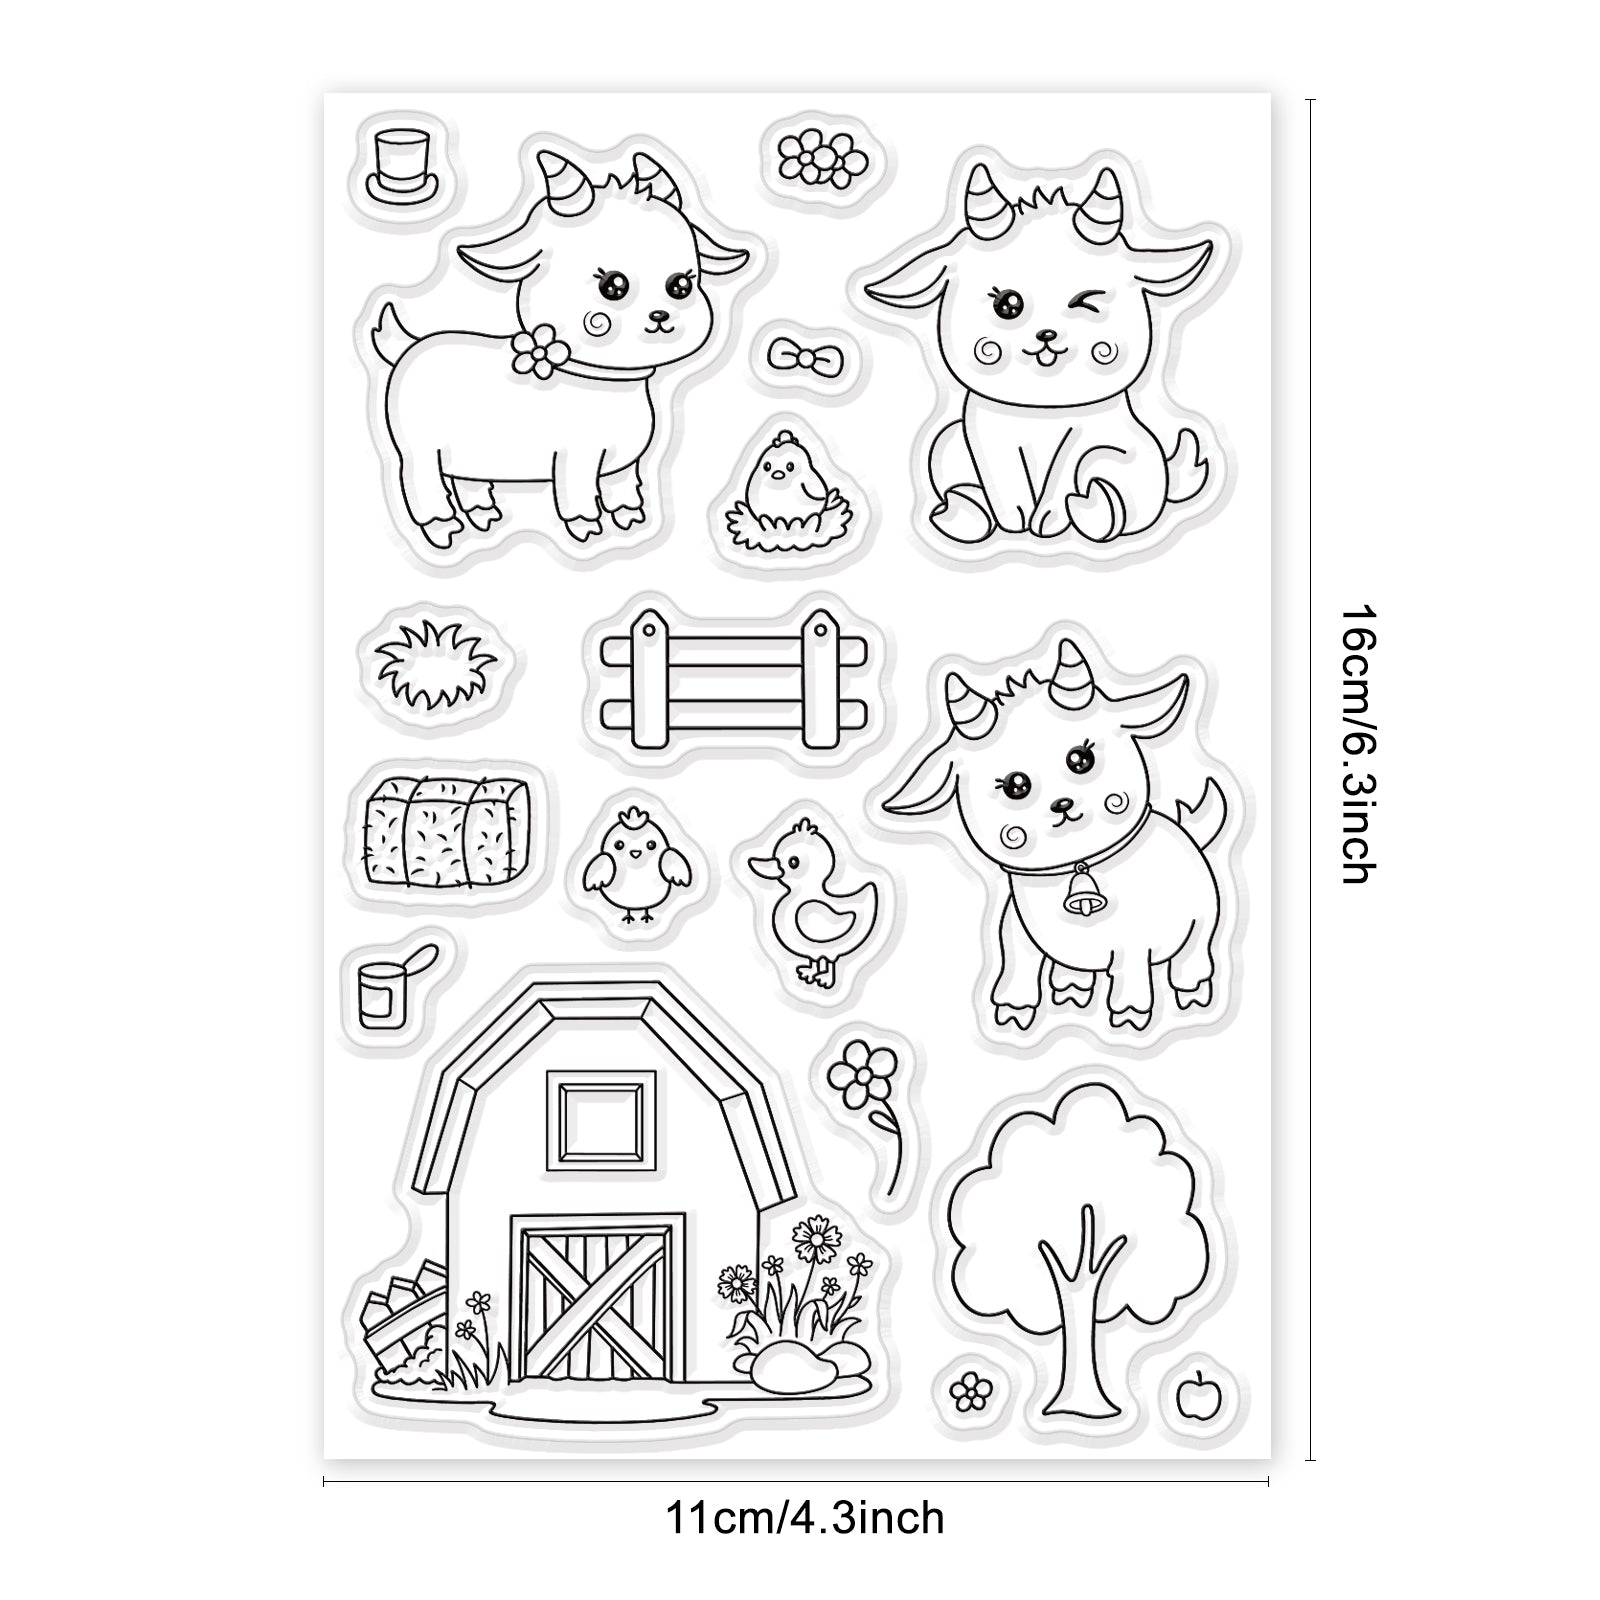 Globleland Sheep, Farm, Orchard, Chicks, Ducklings Clear Silicone Stamp Seal for Card Making Decoration and DIY Scrapbooking